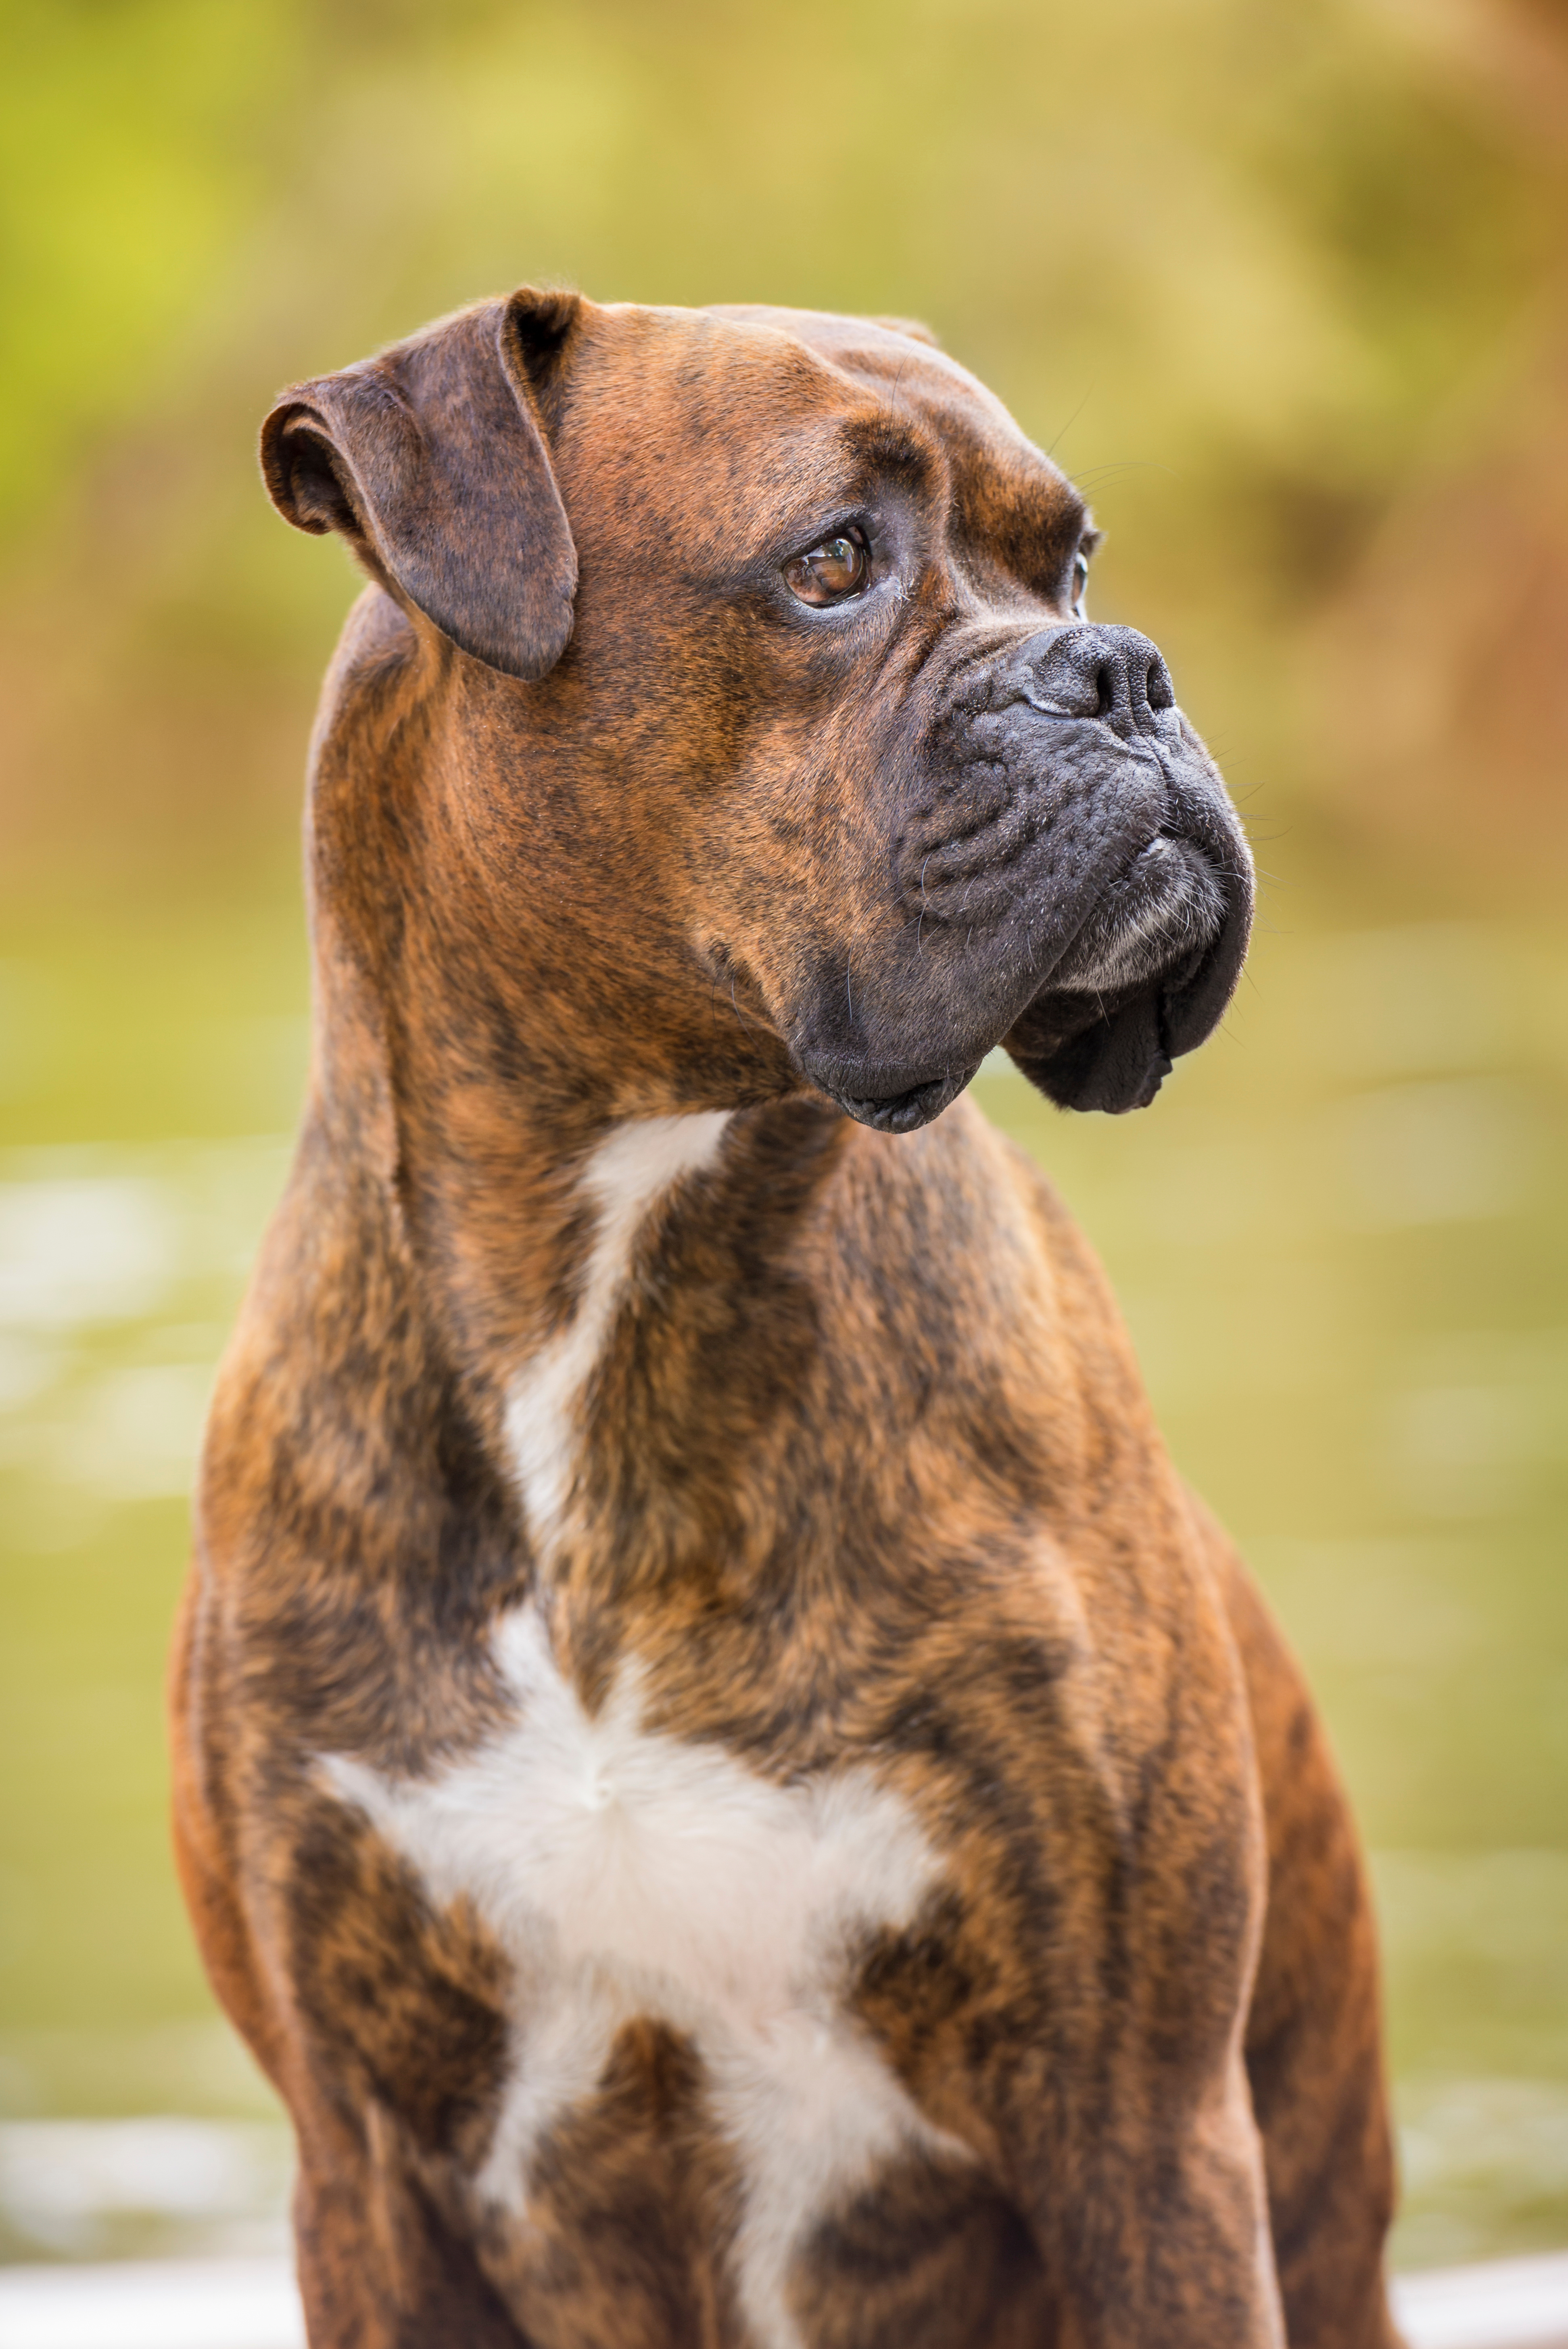 A trained boxer dog - Dog Training Elite Twin Cities is the best choice for boxer dog training in Minneapolis / St. Paul, MN!